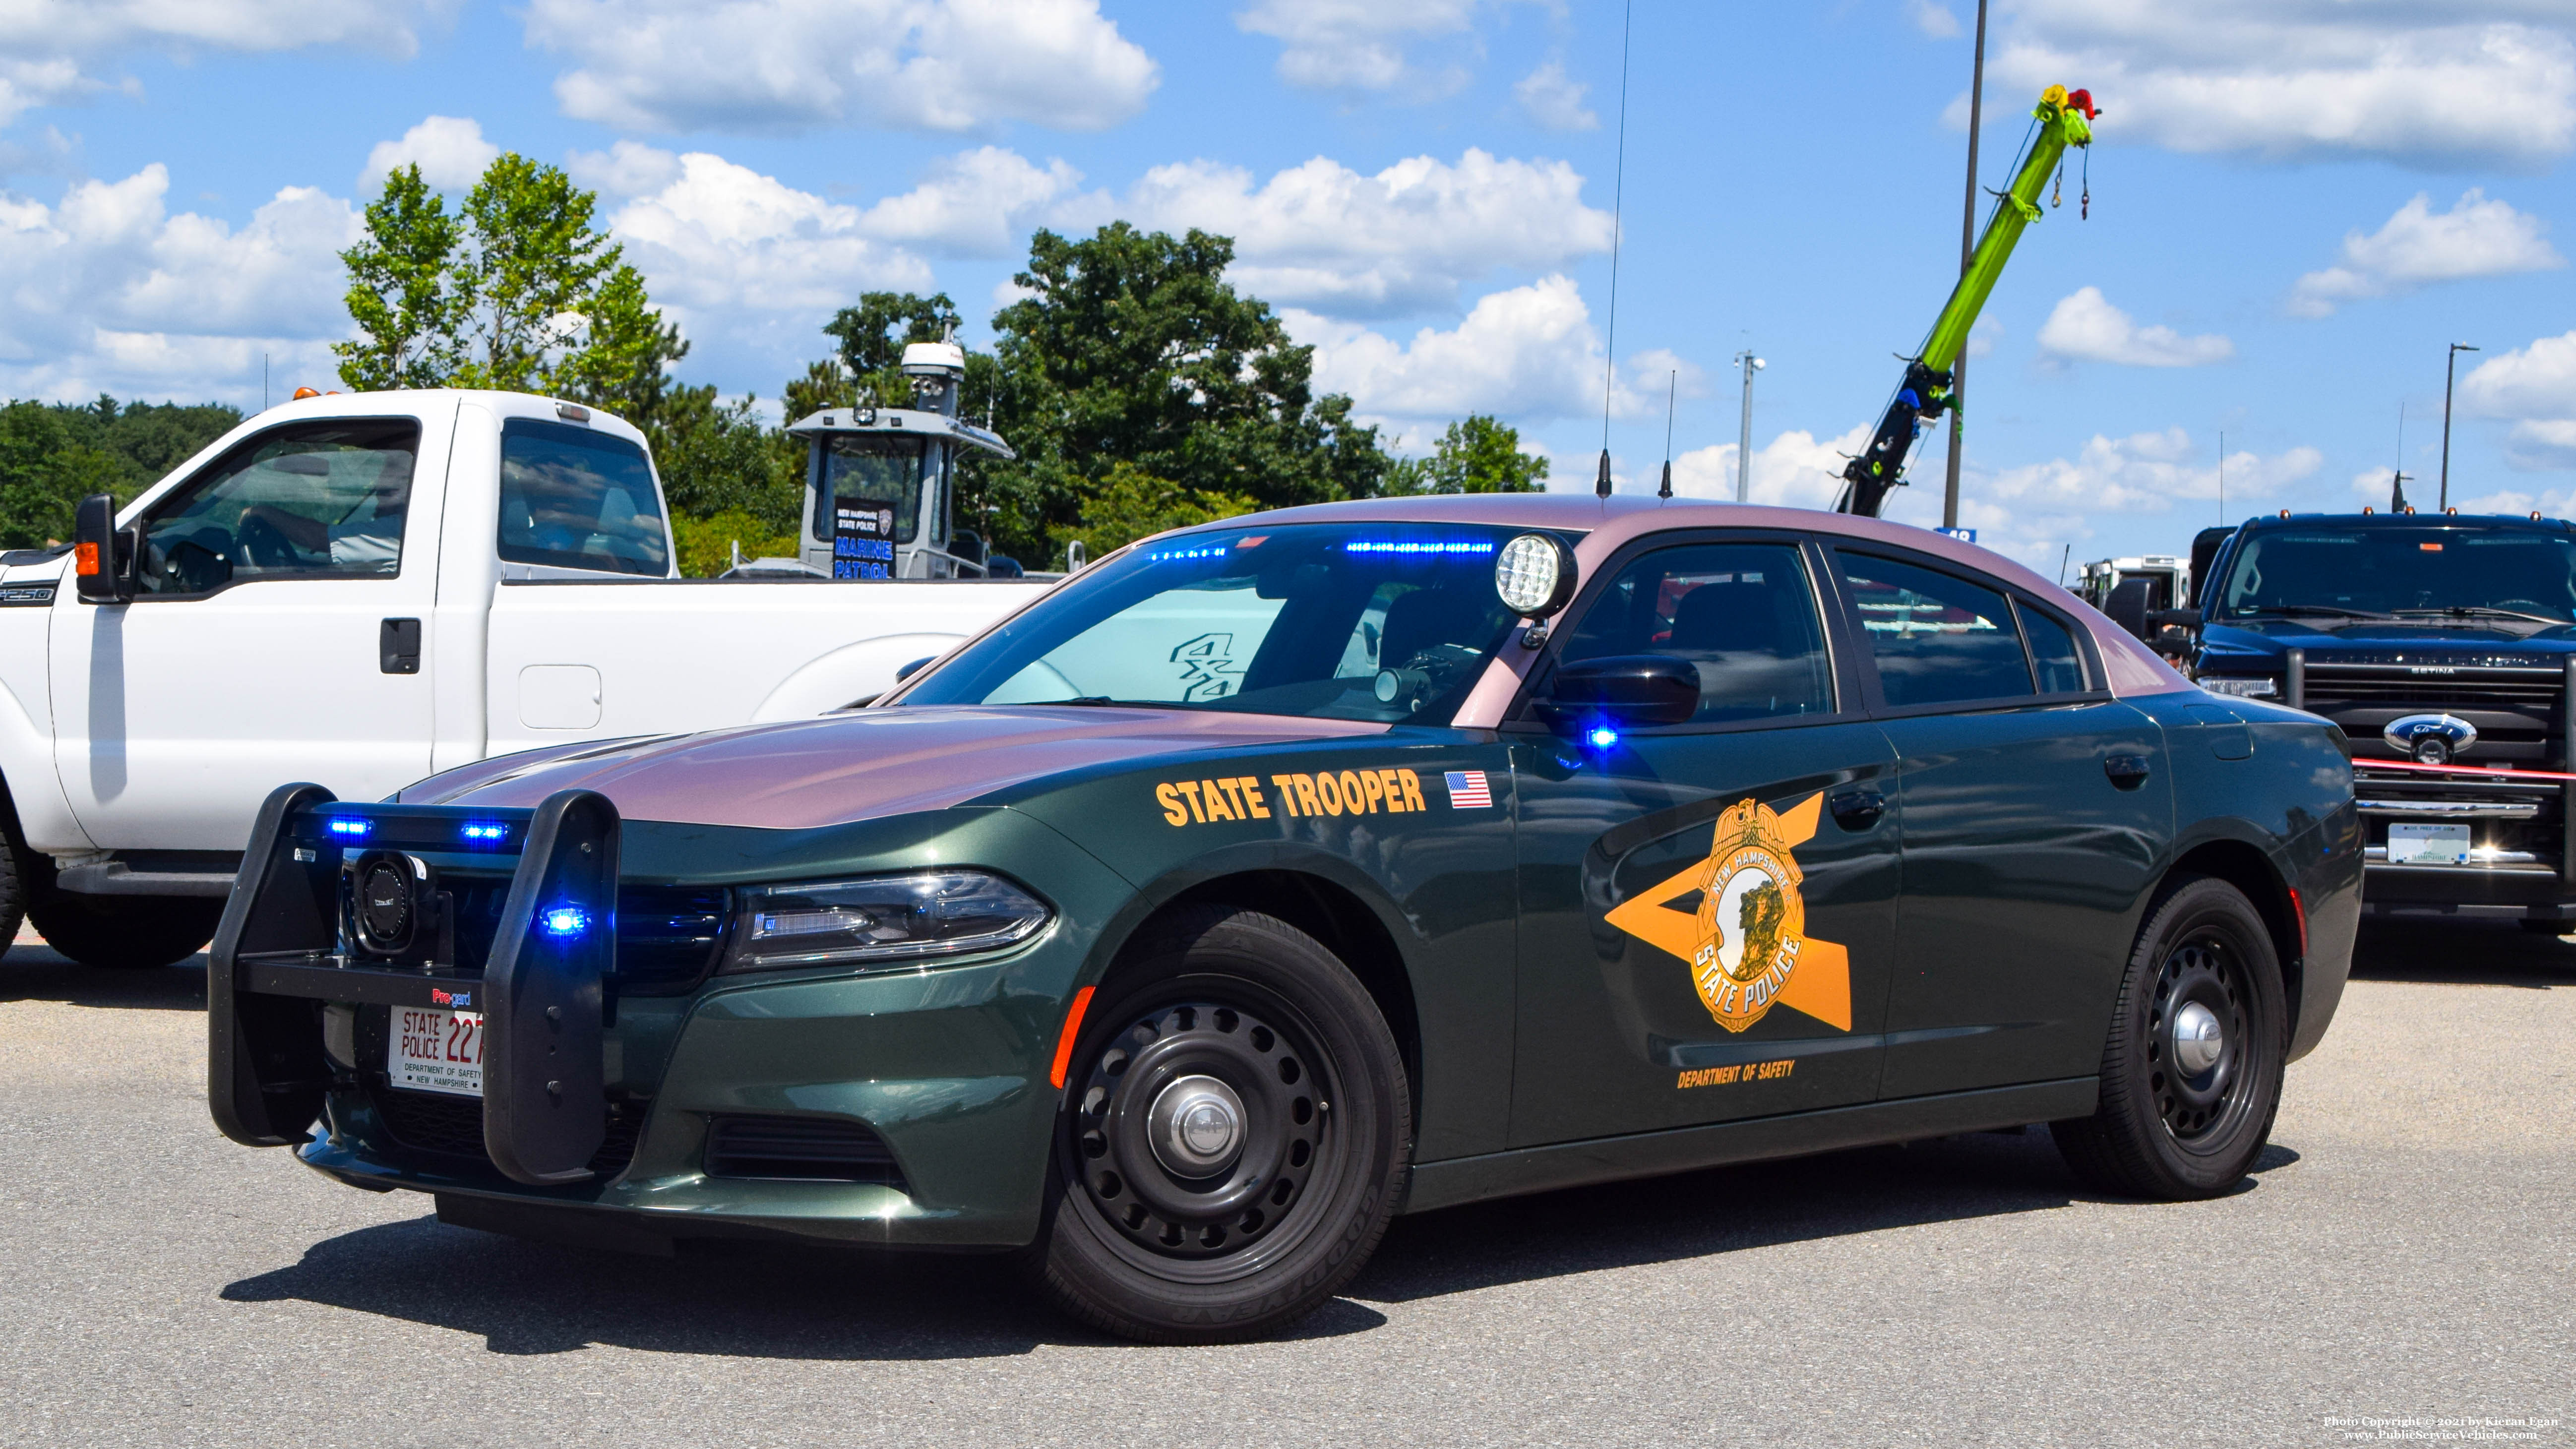 A photo  of New Hampshire State Police
            Cruiser 227, a 2020 Dodge Charger             taken by Kieran Egan